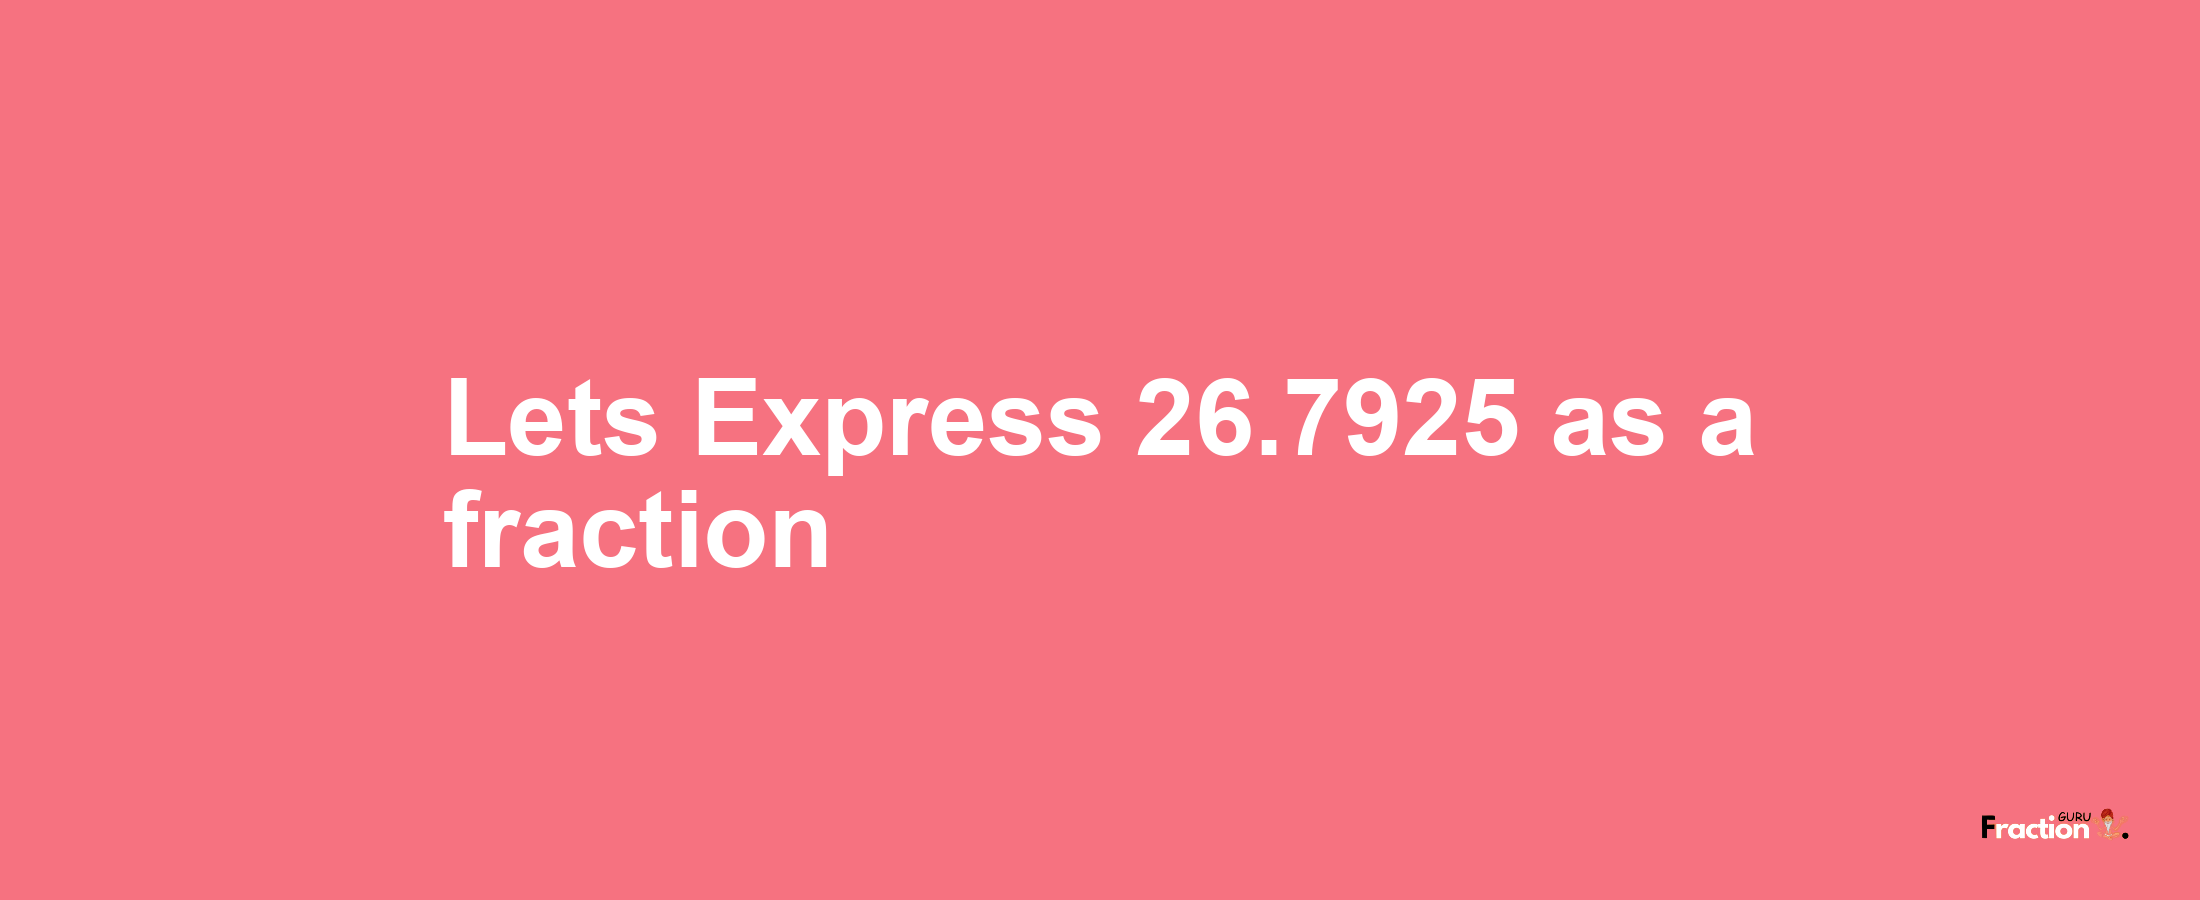 Lets Express 26.7925 as afraction